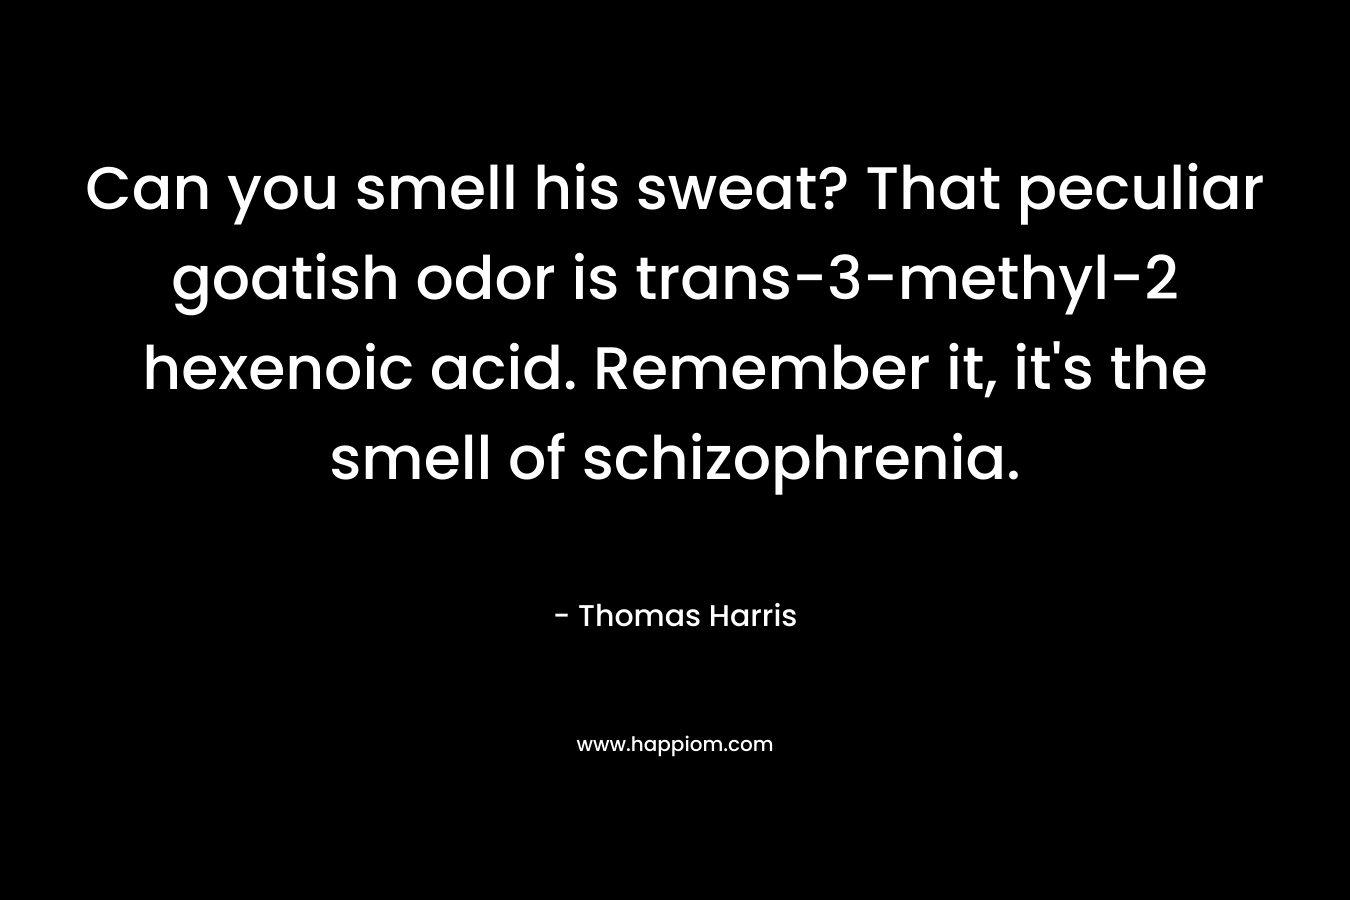 Can you smell his sweat? That peculiar goatish odor is trans-3-methyl-2 hexenoic acid. Remember it, it’s the smell of schizophrenia. – Thomas Harris